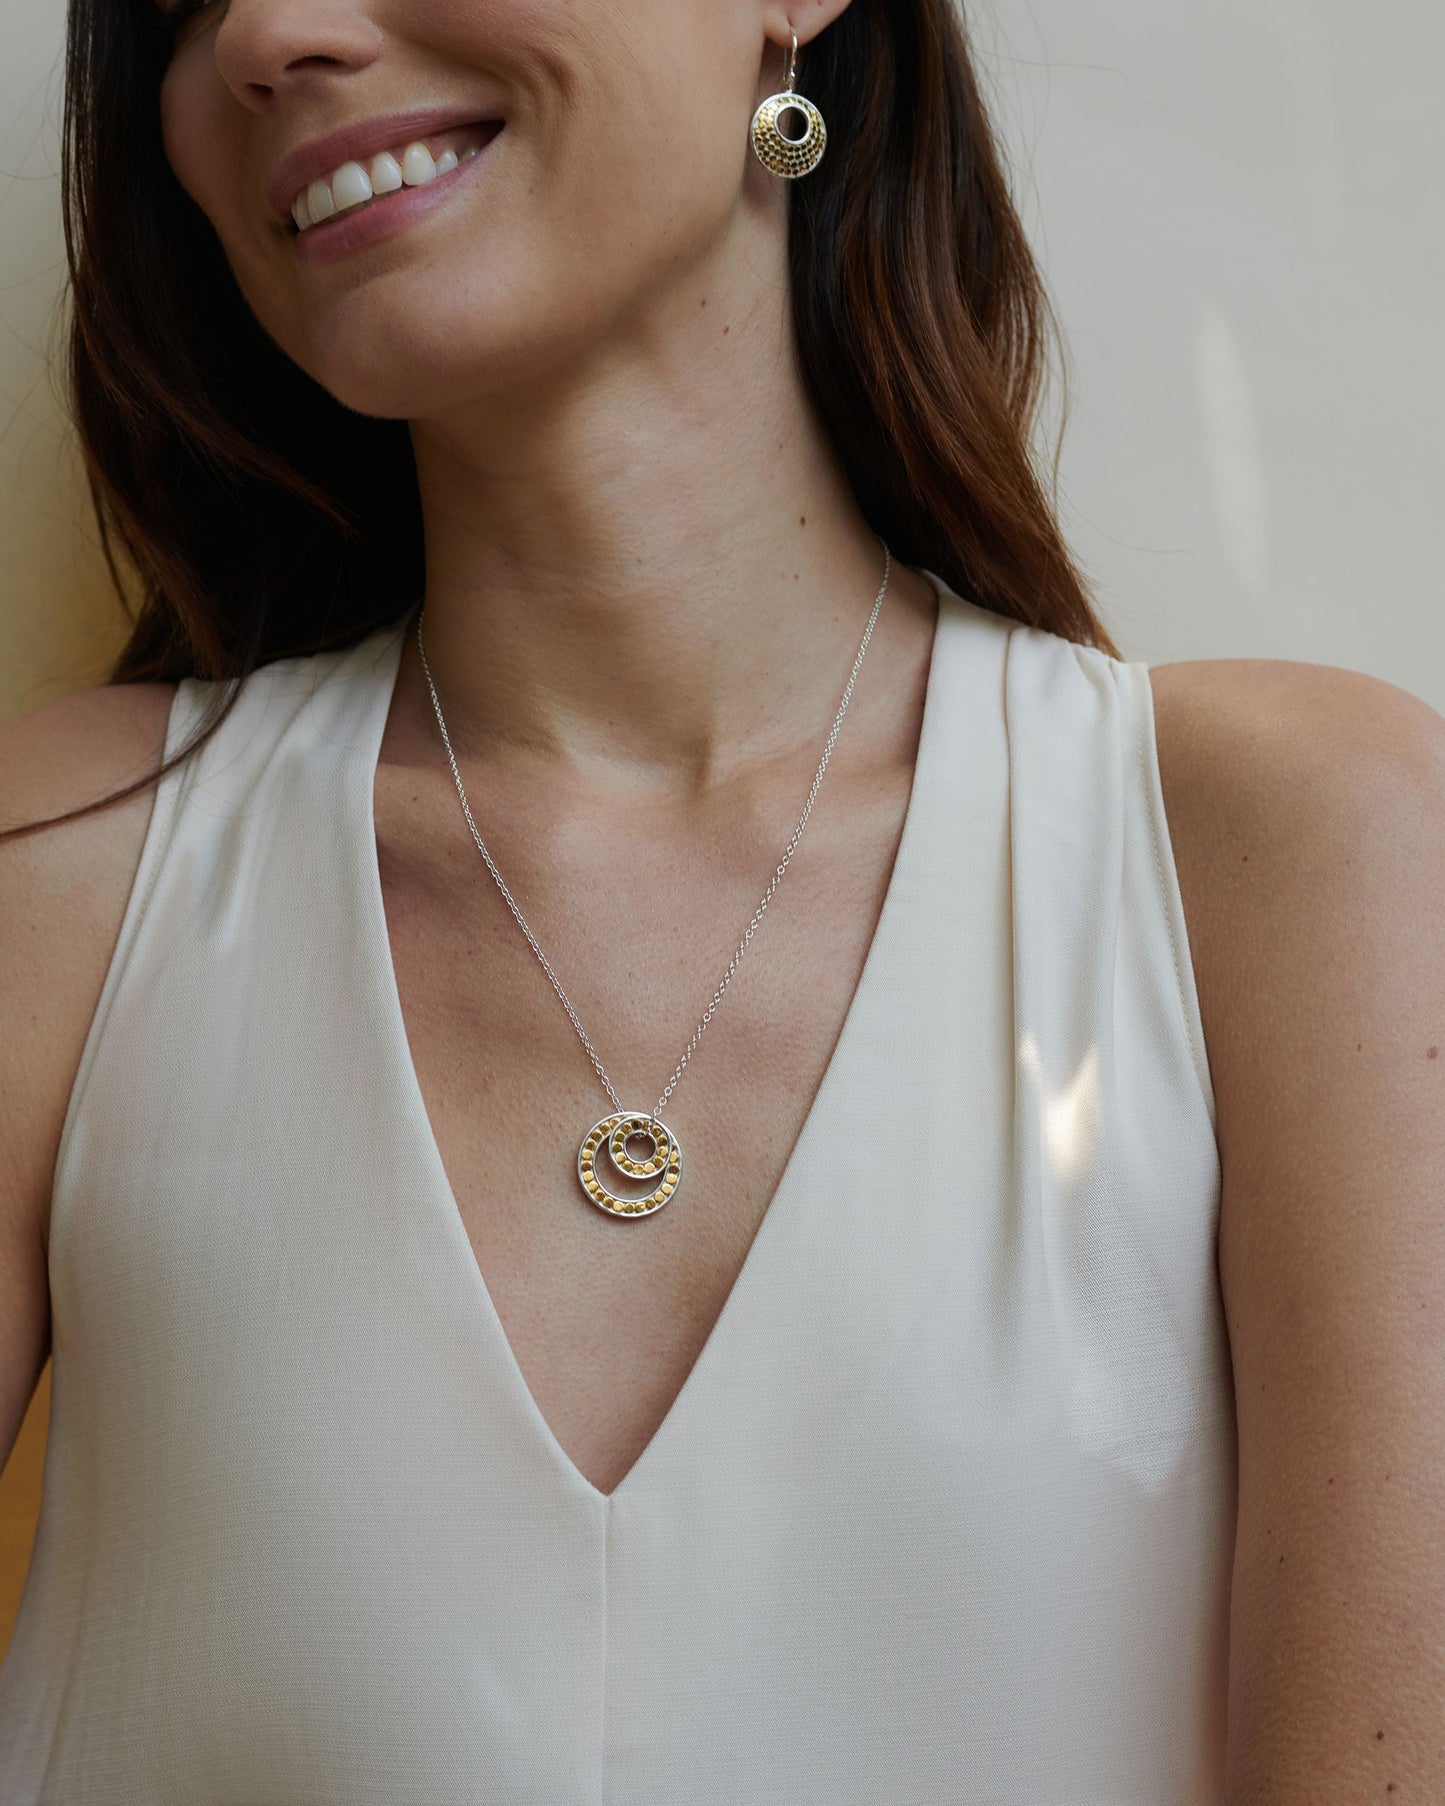 Classic Double Floating "O" Necklace